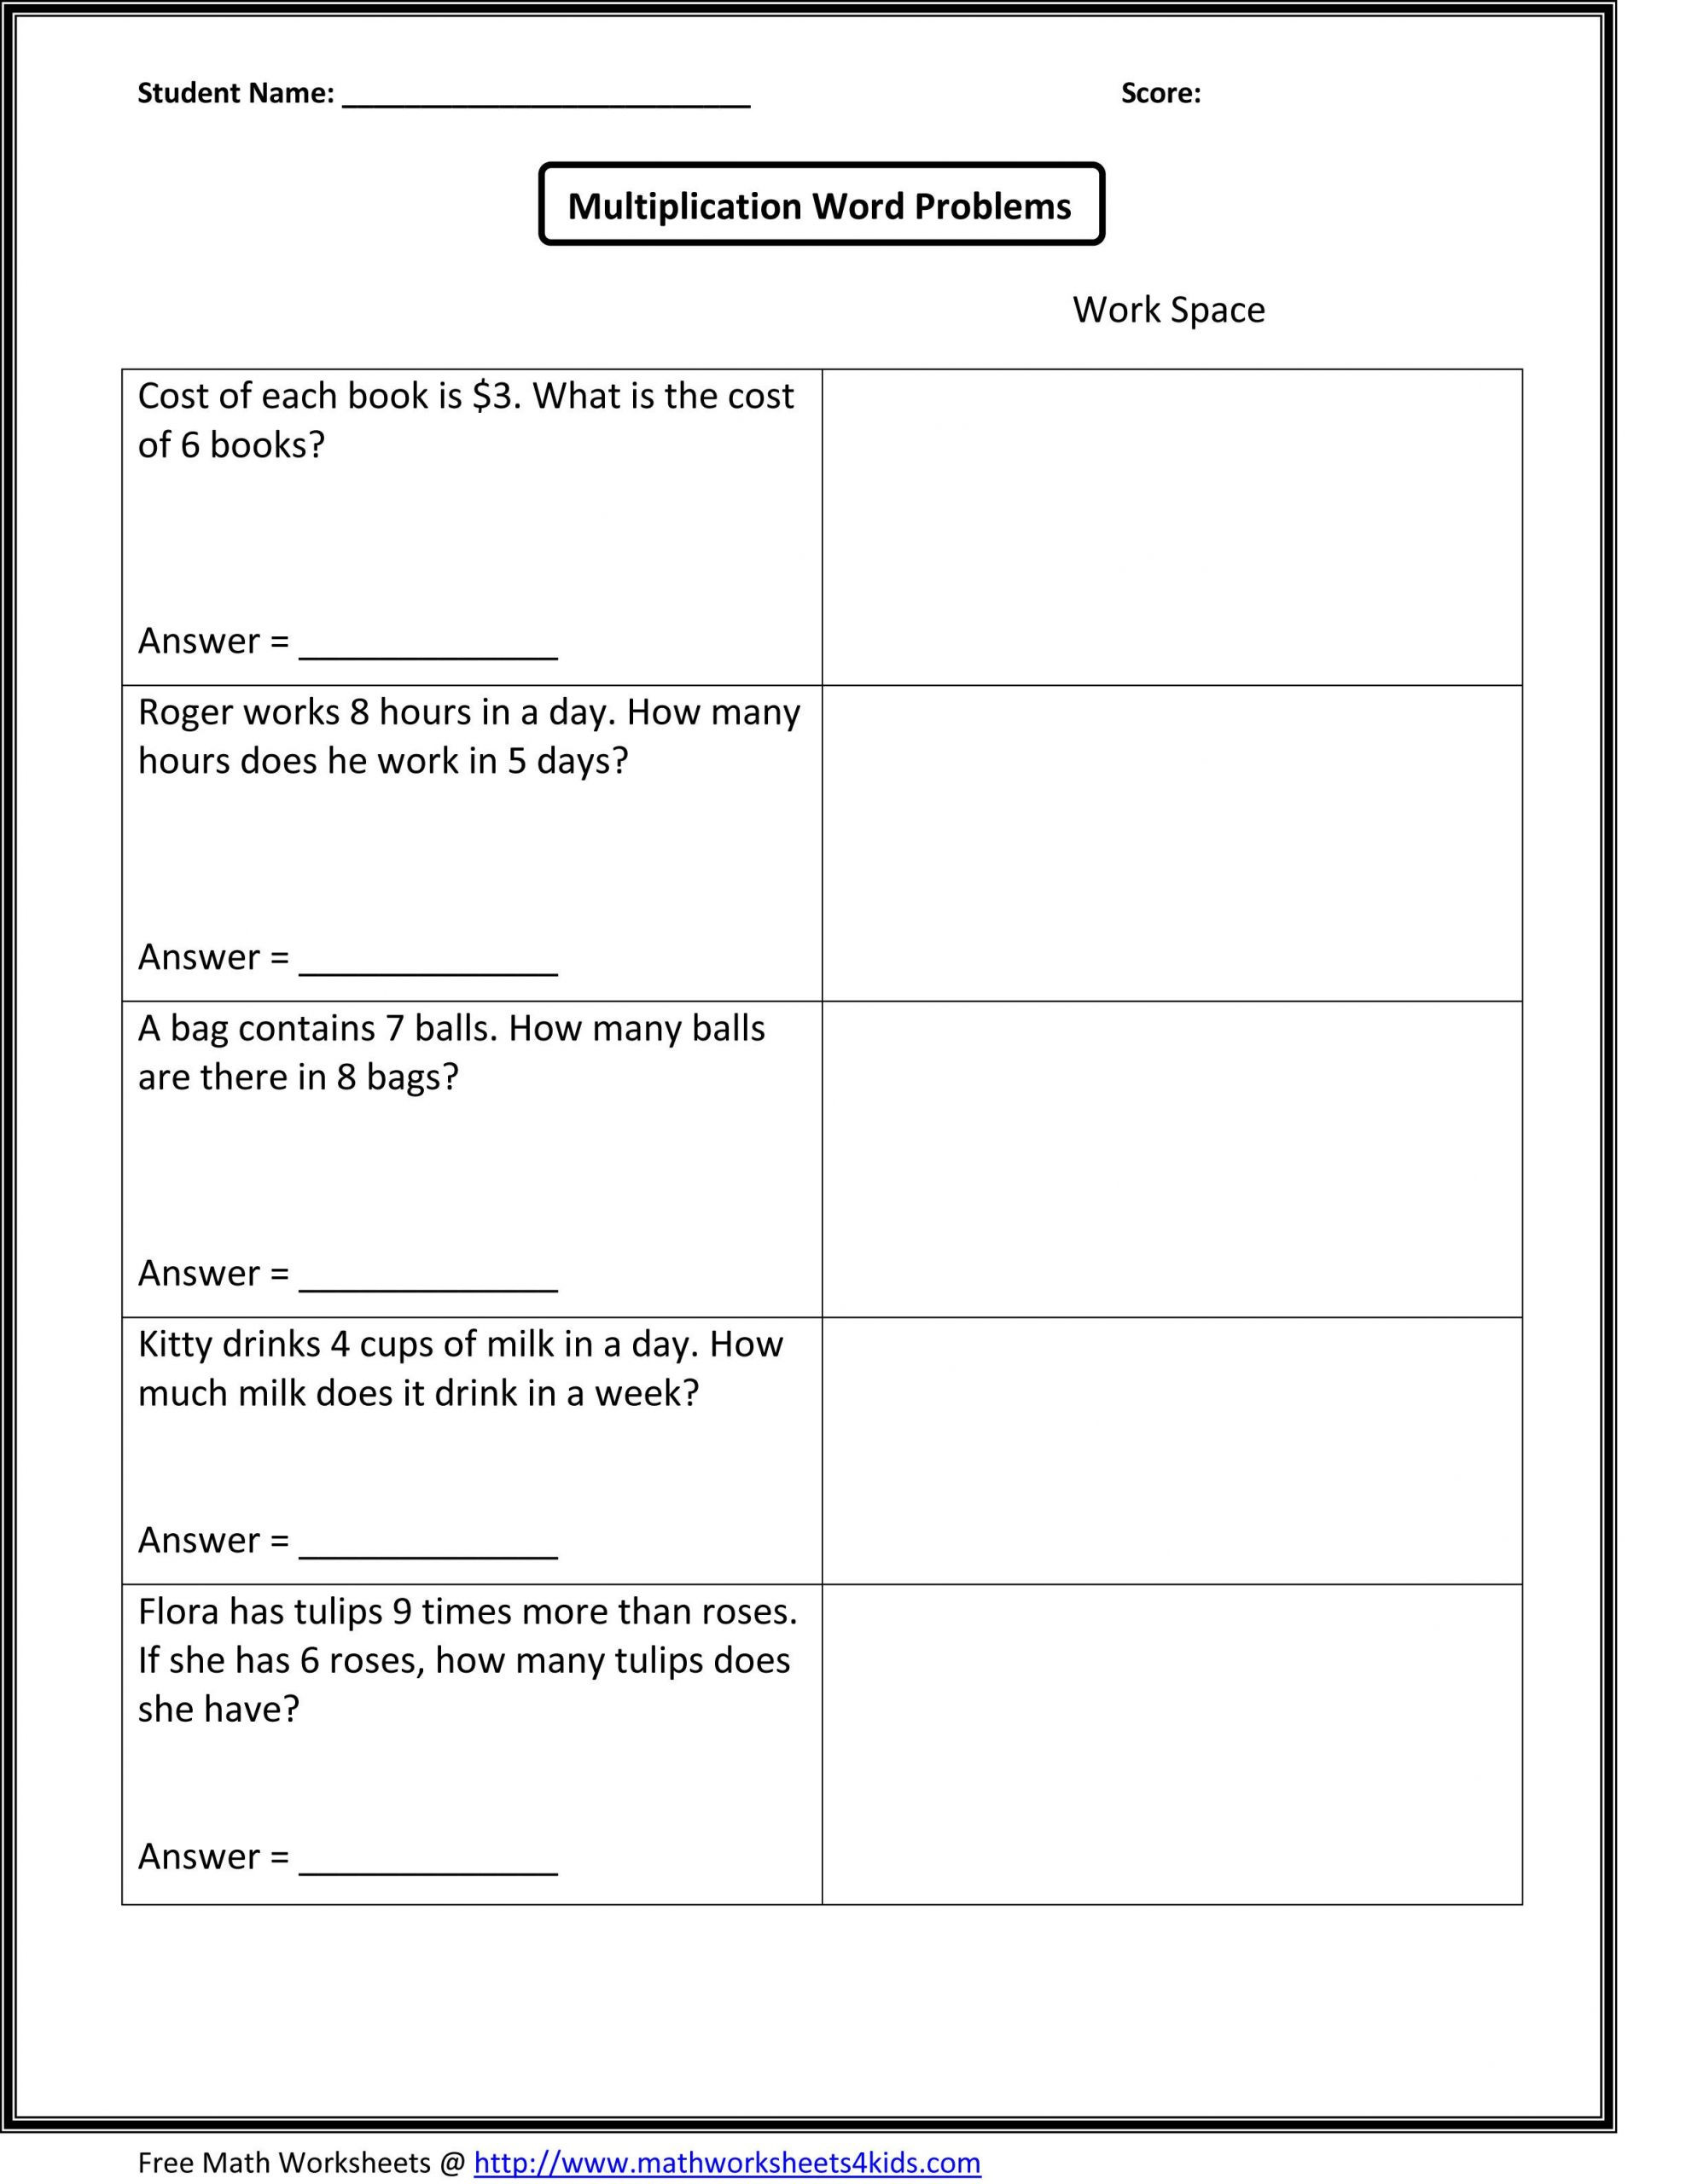 Third Grade Fraction Word Problems 5 3rd Grade Math Word Problems Template Worksheets Schools